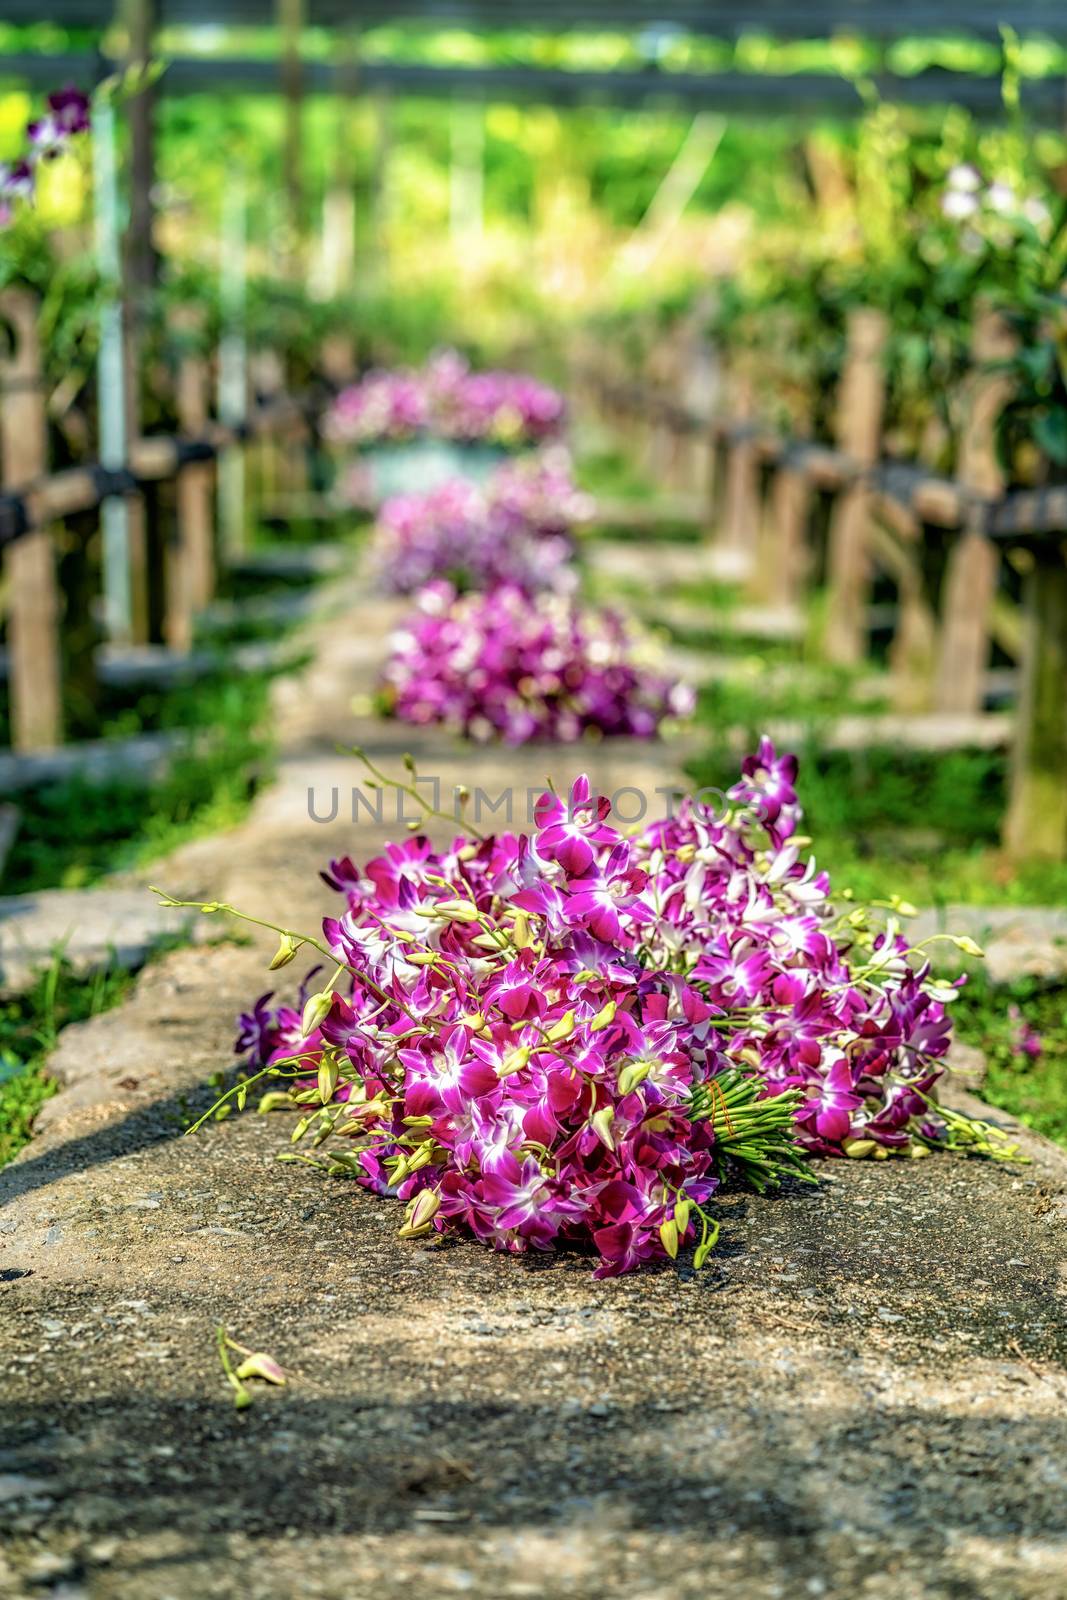 Bundle of purple orchids on the ground after asian gardener collected in orchid farm of asean small business owner, The purple orchids are blooming in the garden farm of bangkok, thailand. industry